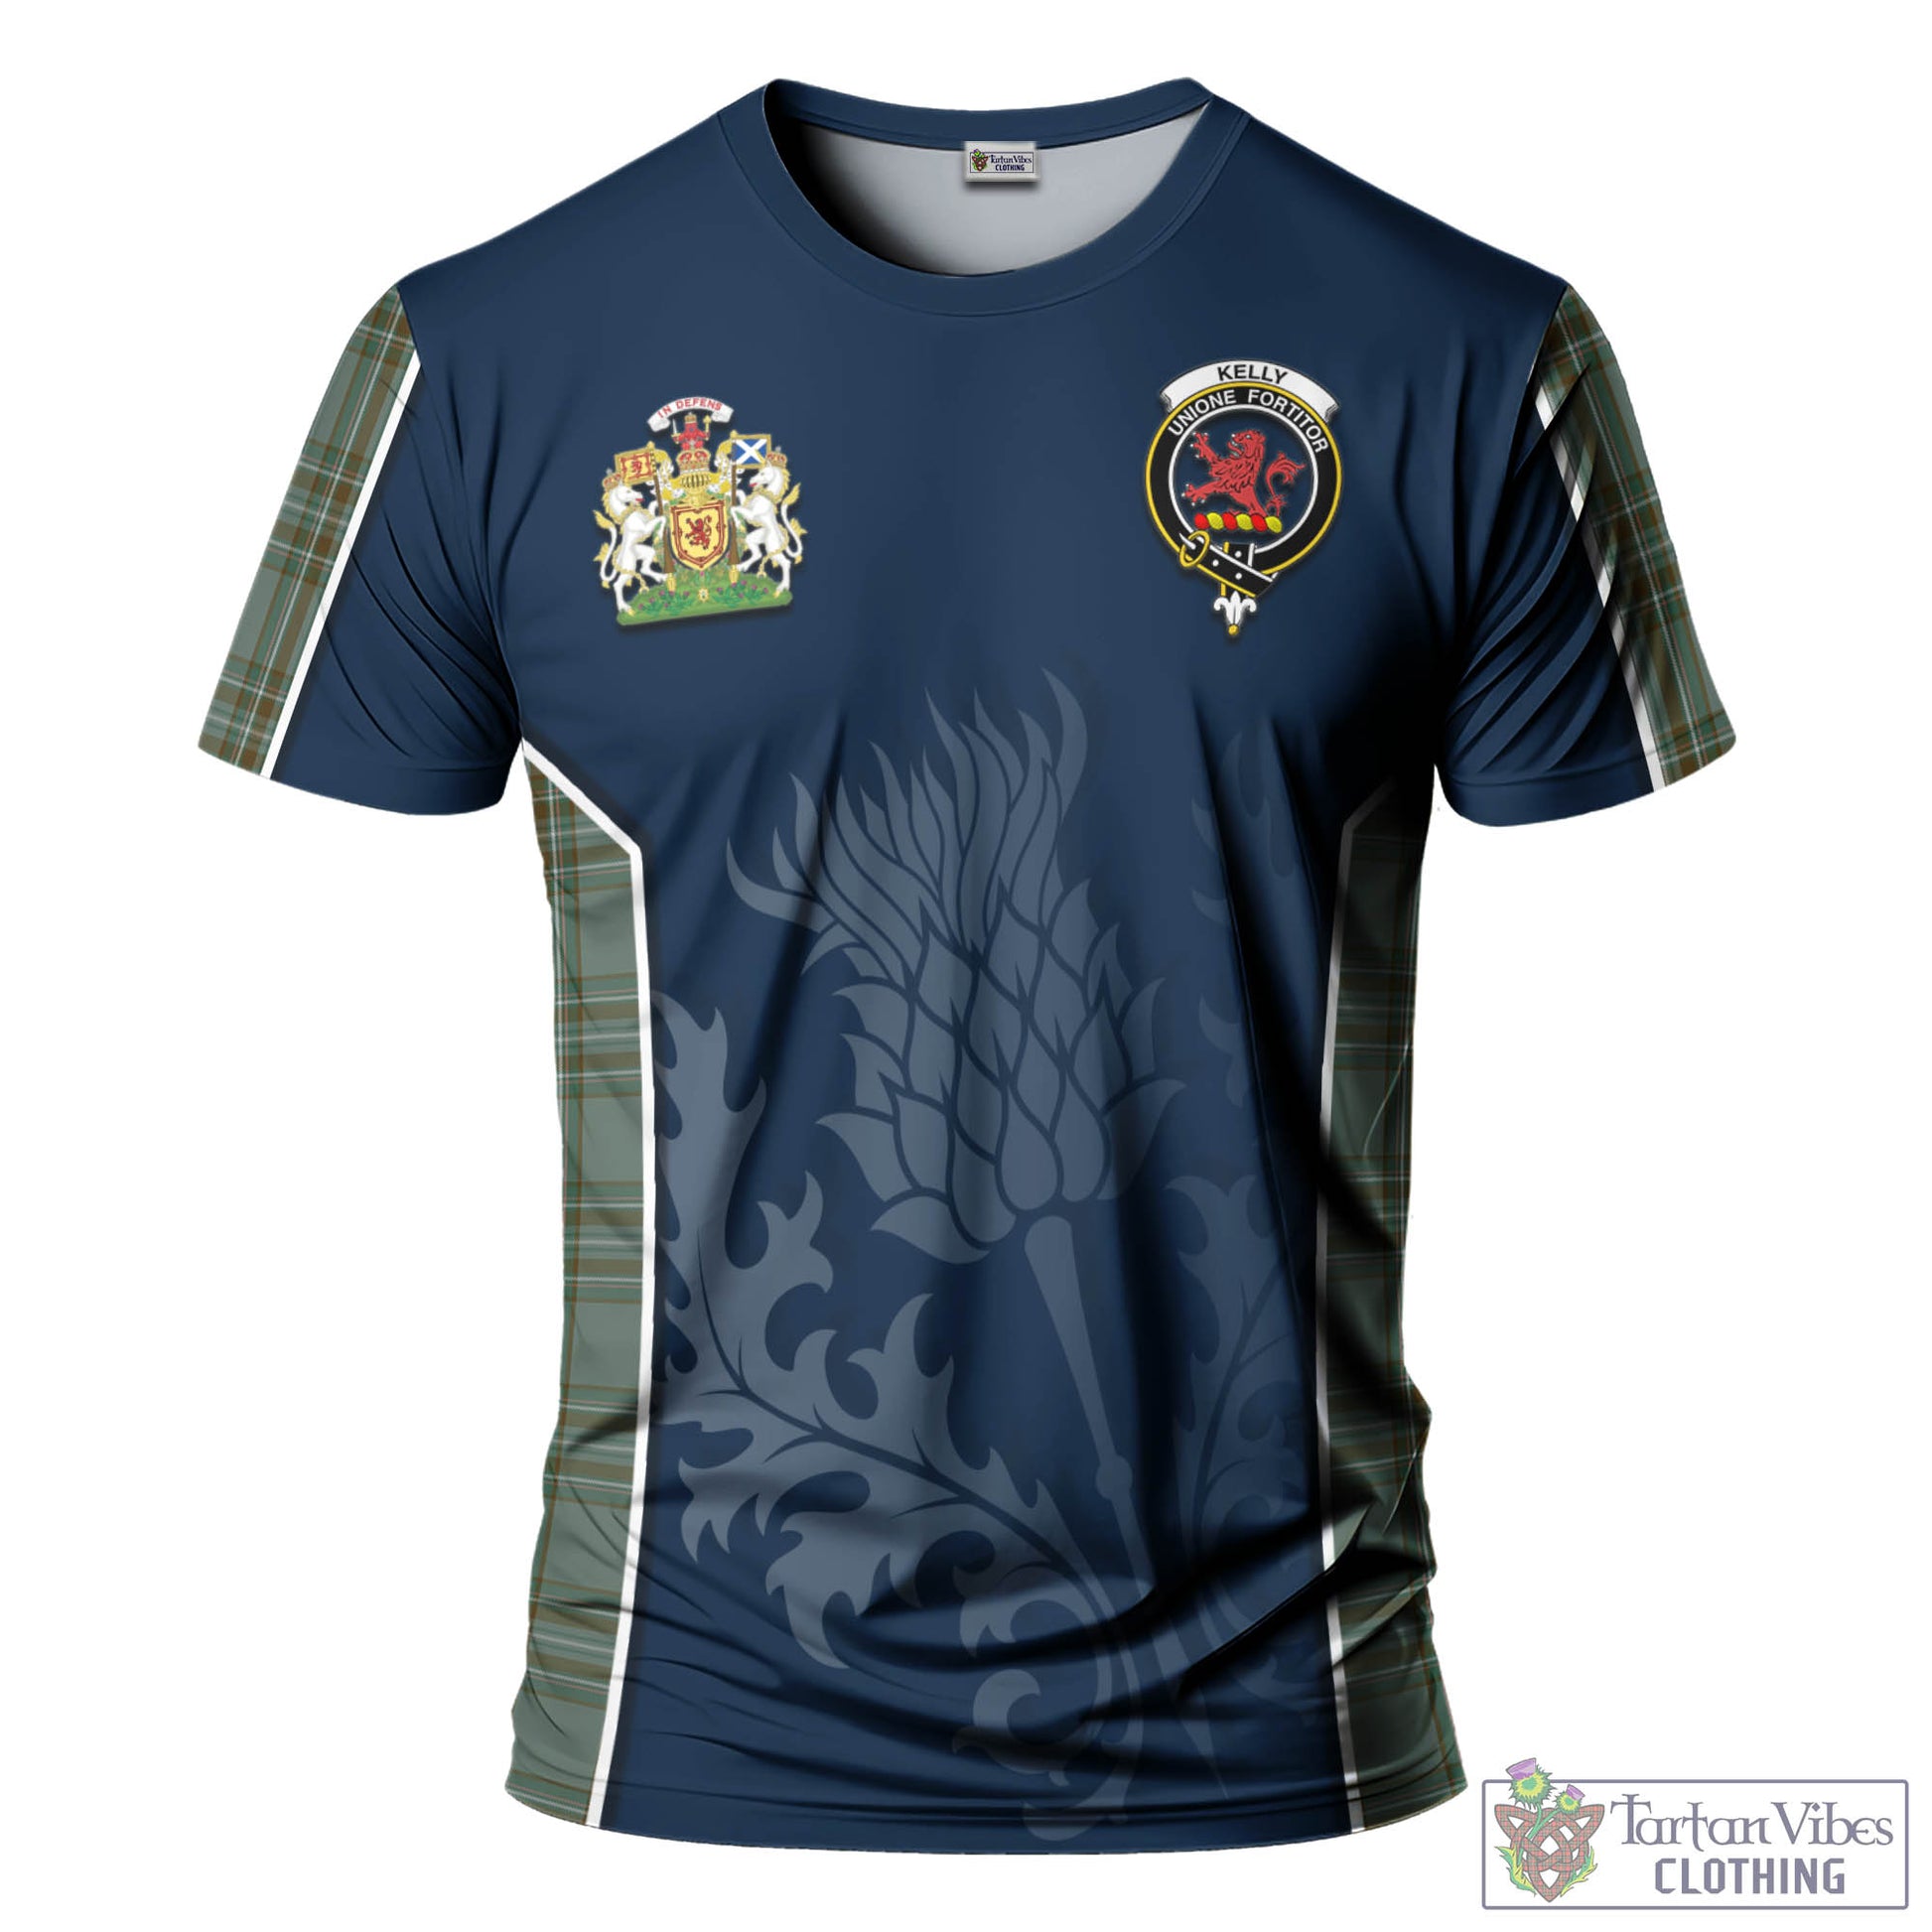 Tartan Vibes Clothing Kelly Dress Tartan T-Shirt with Family Crest and Scottish Thistle Vibes Sport Style